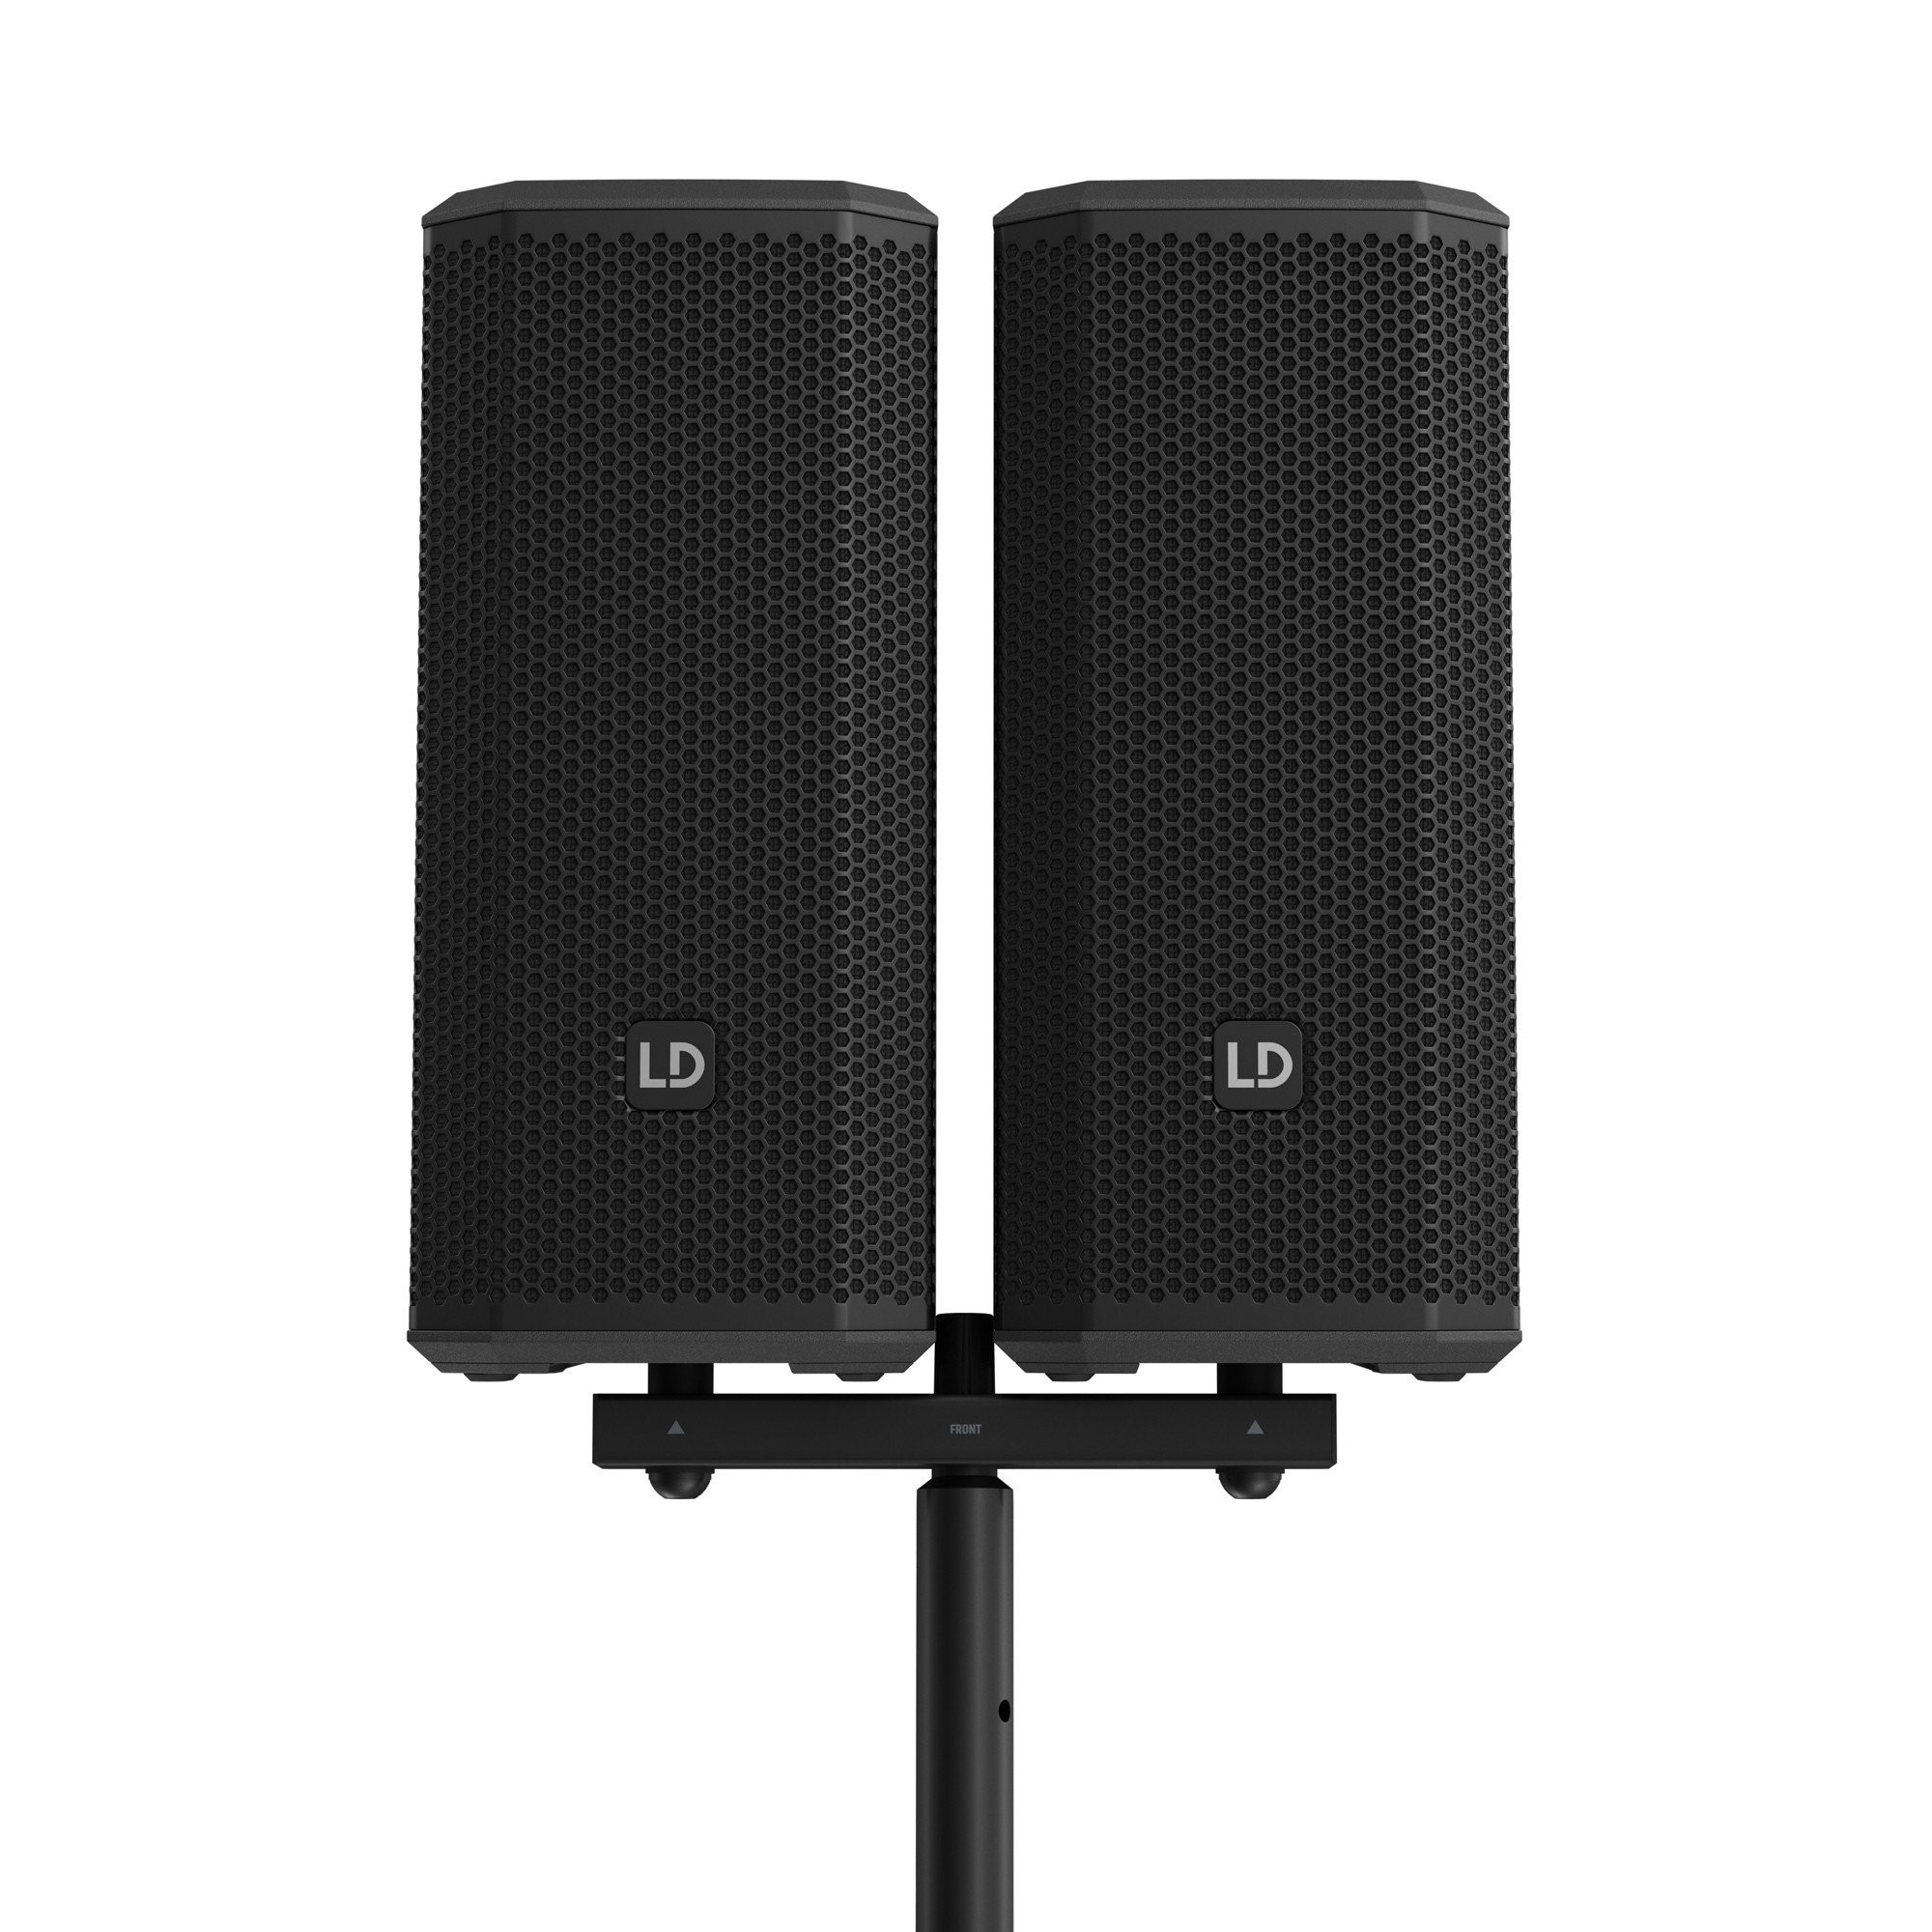 DAVE 10 G4X DUAL STAND